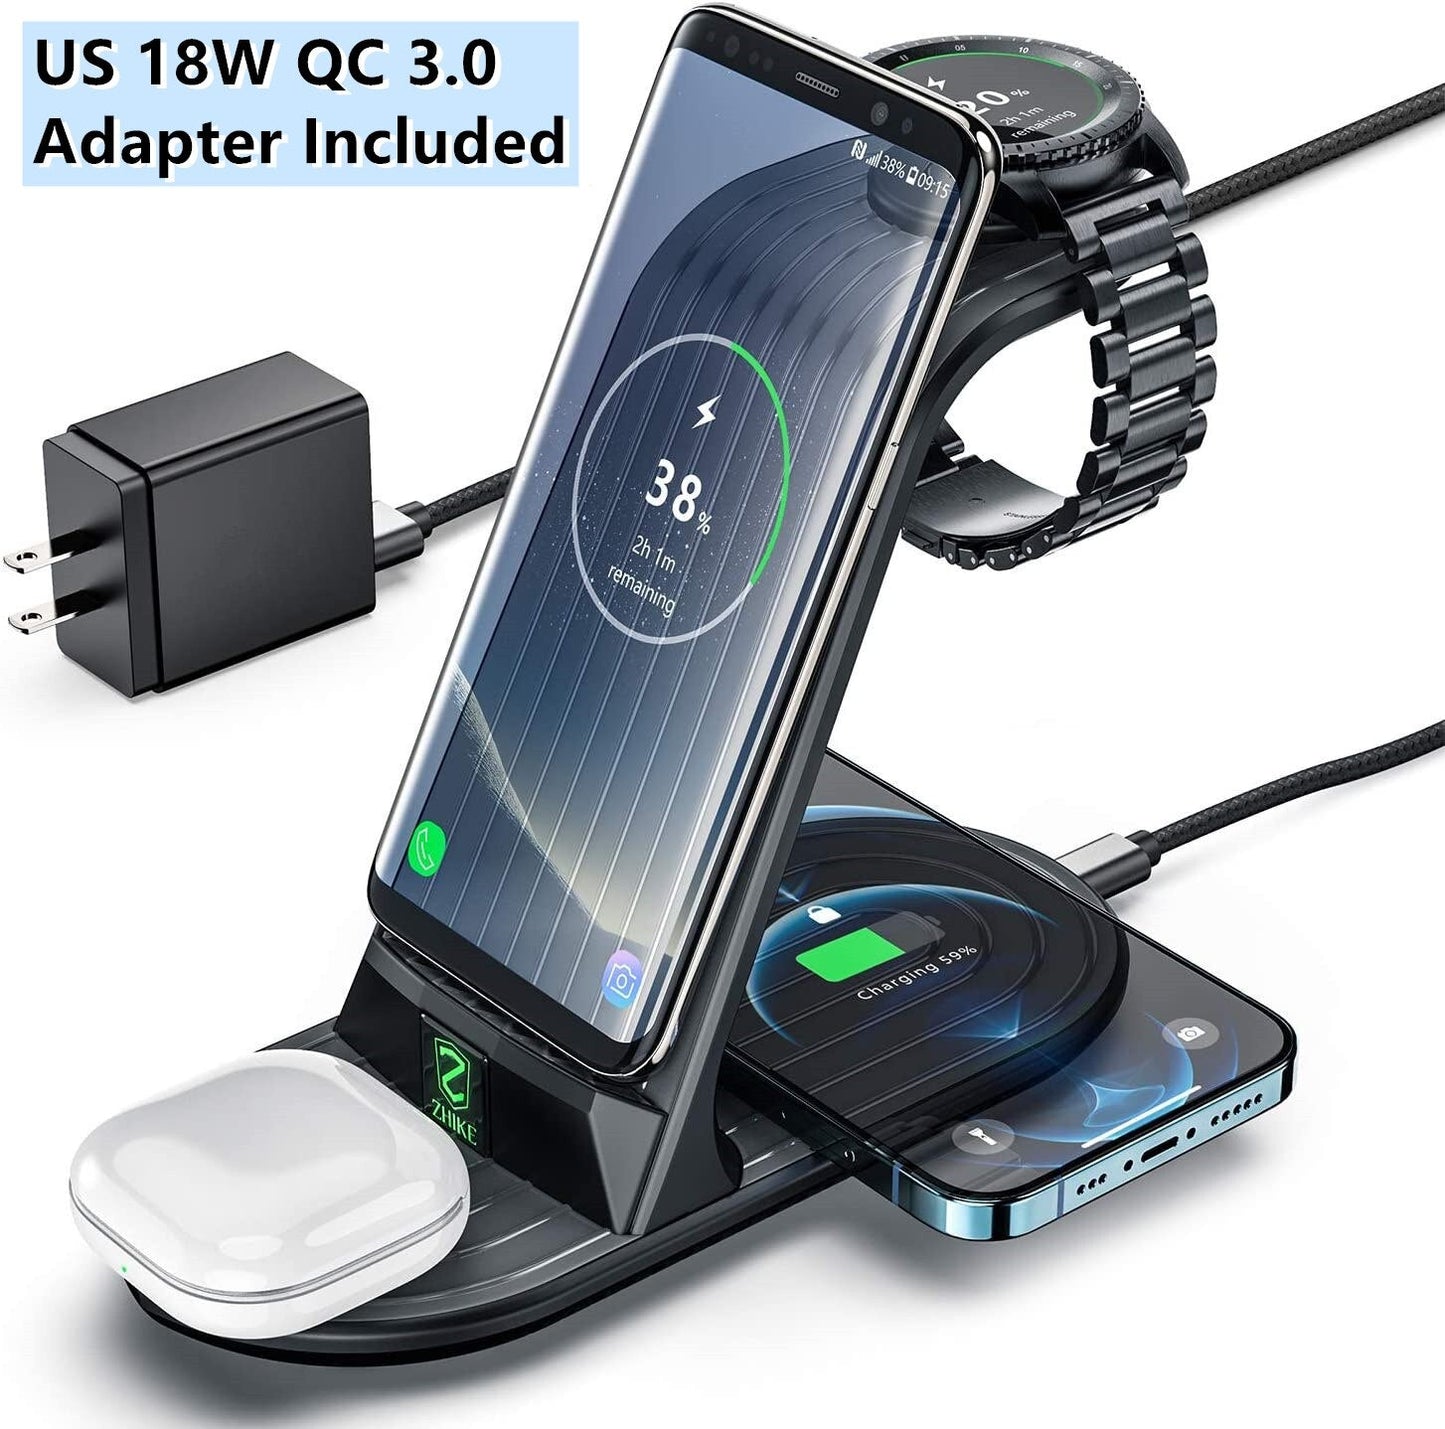 Station de charge rapide 4 en 1 pour Samsung Galaxy Watch 3, Gear, Buds, Note 20, S21, iPhone 12, 11 Pro Max, AirPods